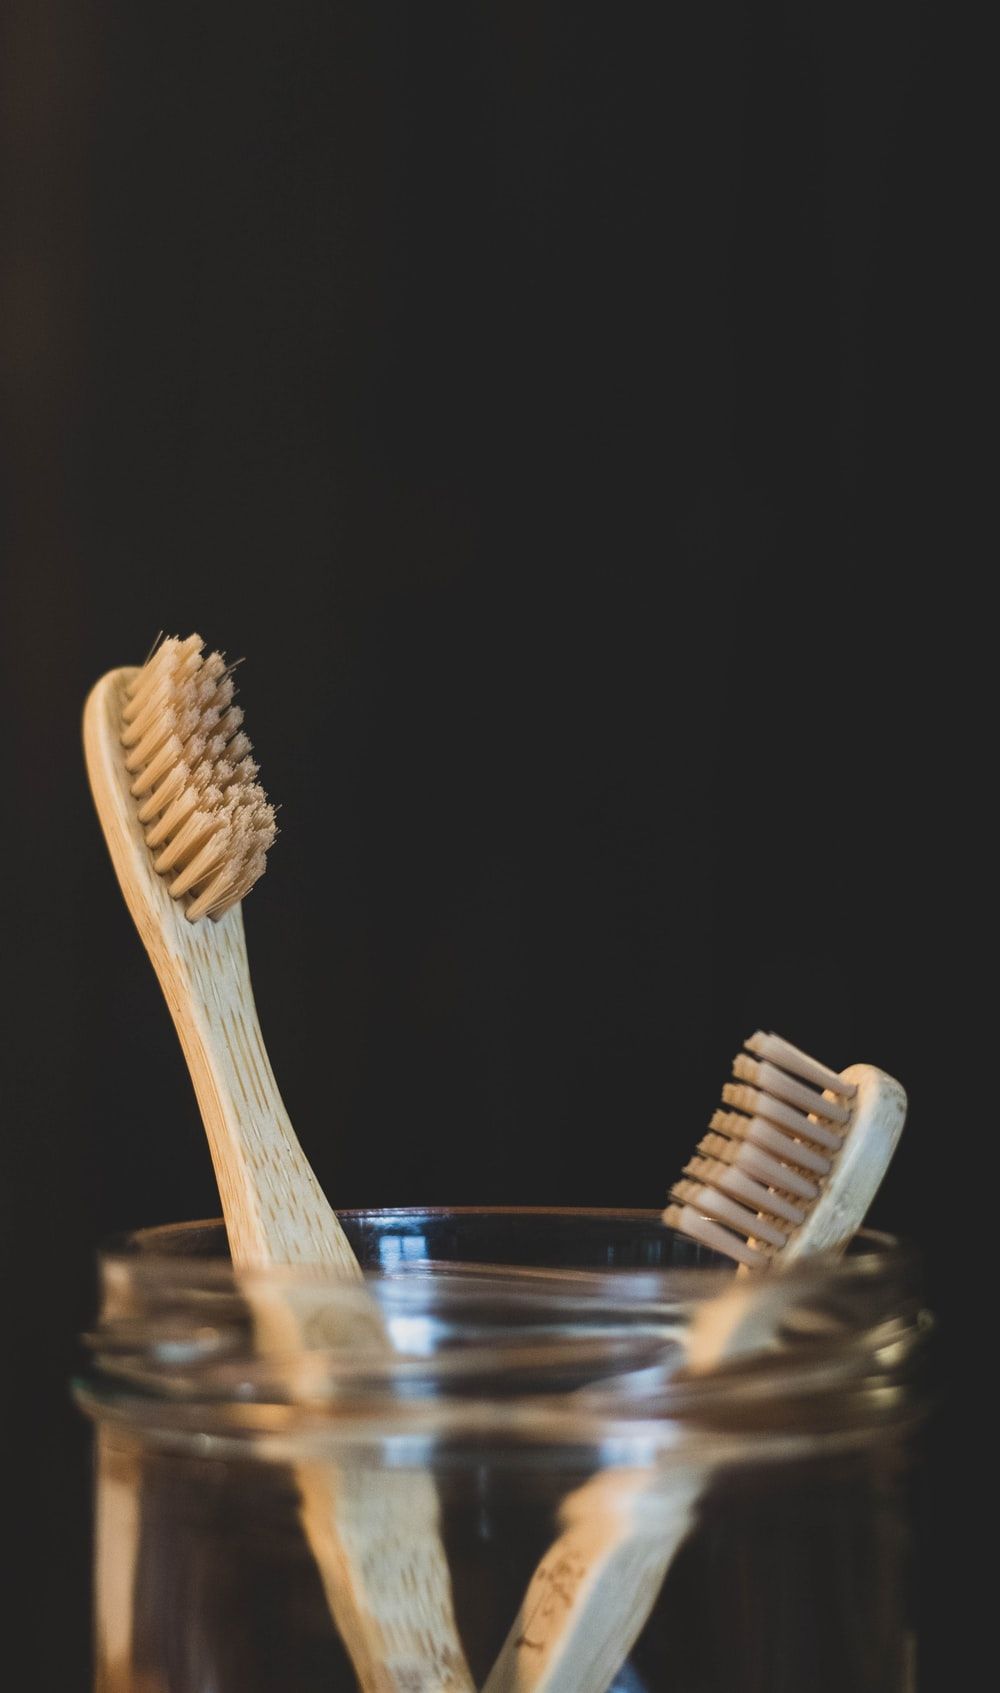 Bamboo Toothbrush Picture. Download Free Image